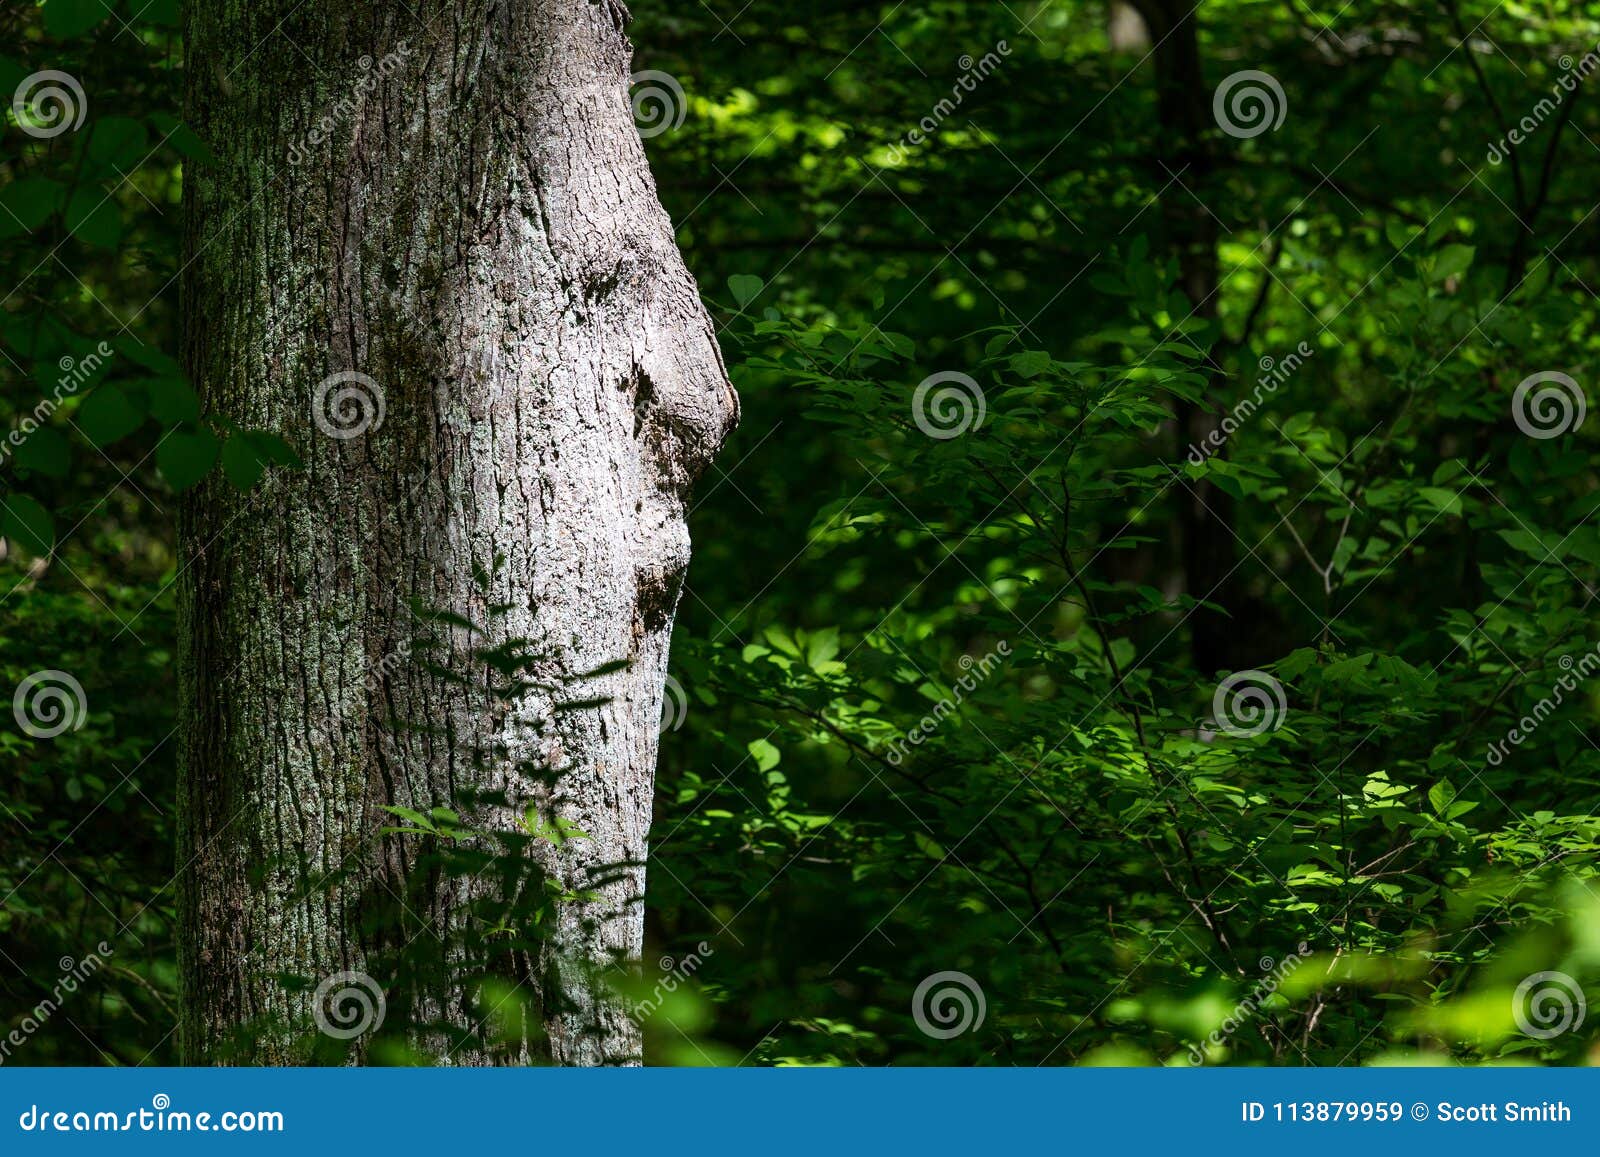 old man in the tree trunk.